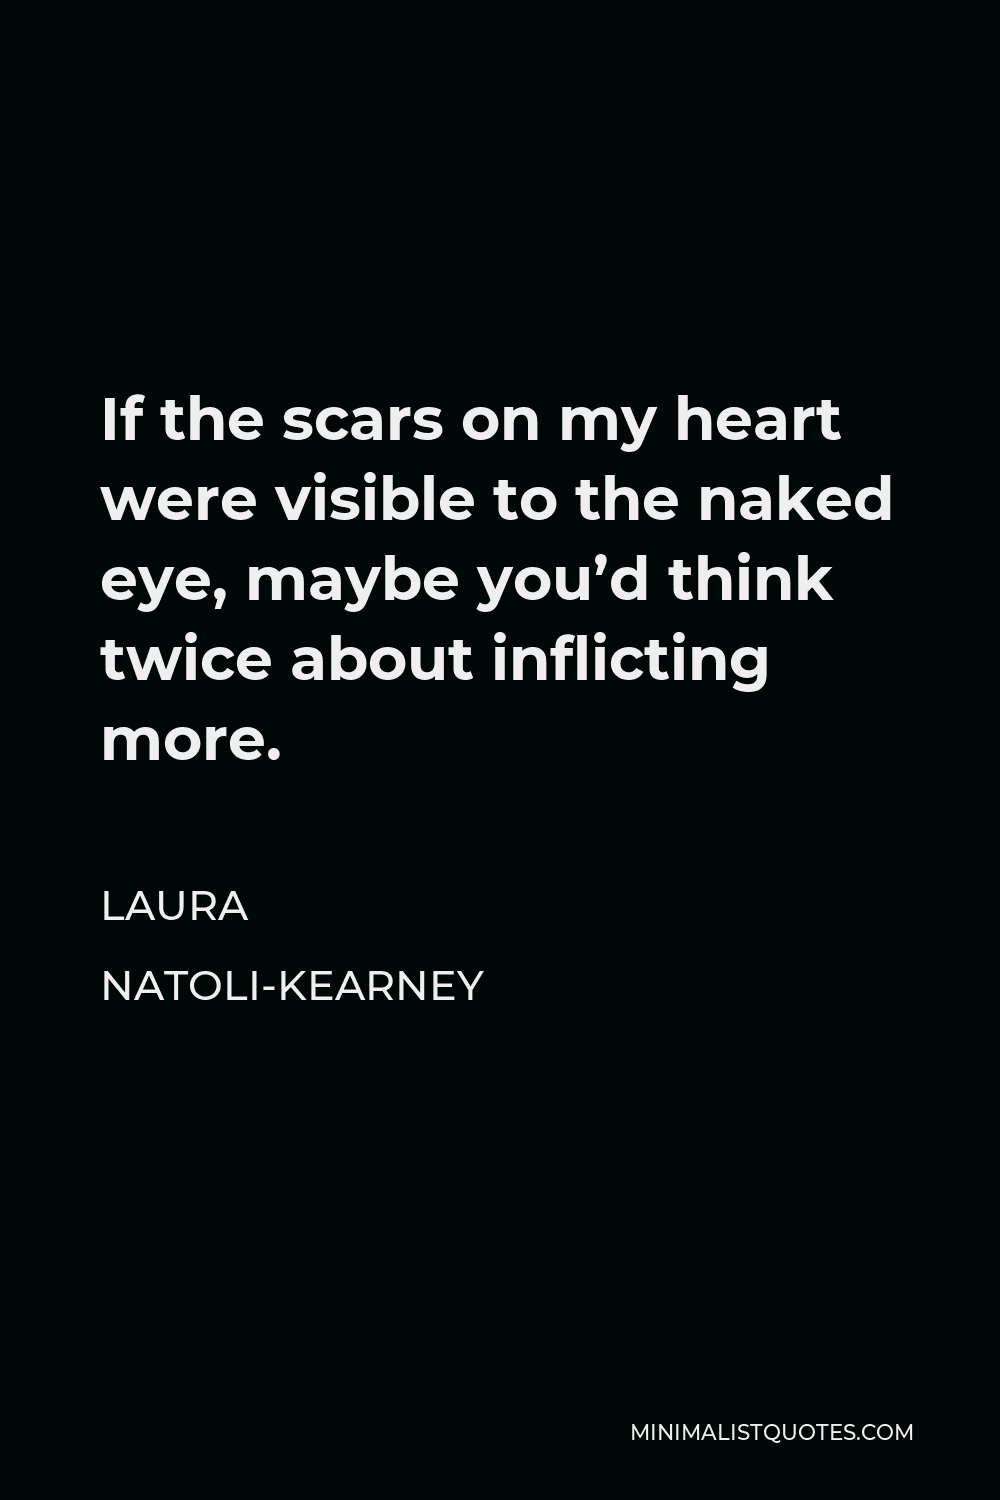 Laura Natoli-Kearney Quote - If the scars on my heart were visible to the naked eye, maybe you’d think twice about inflicting more.